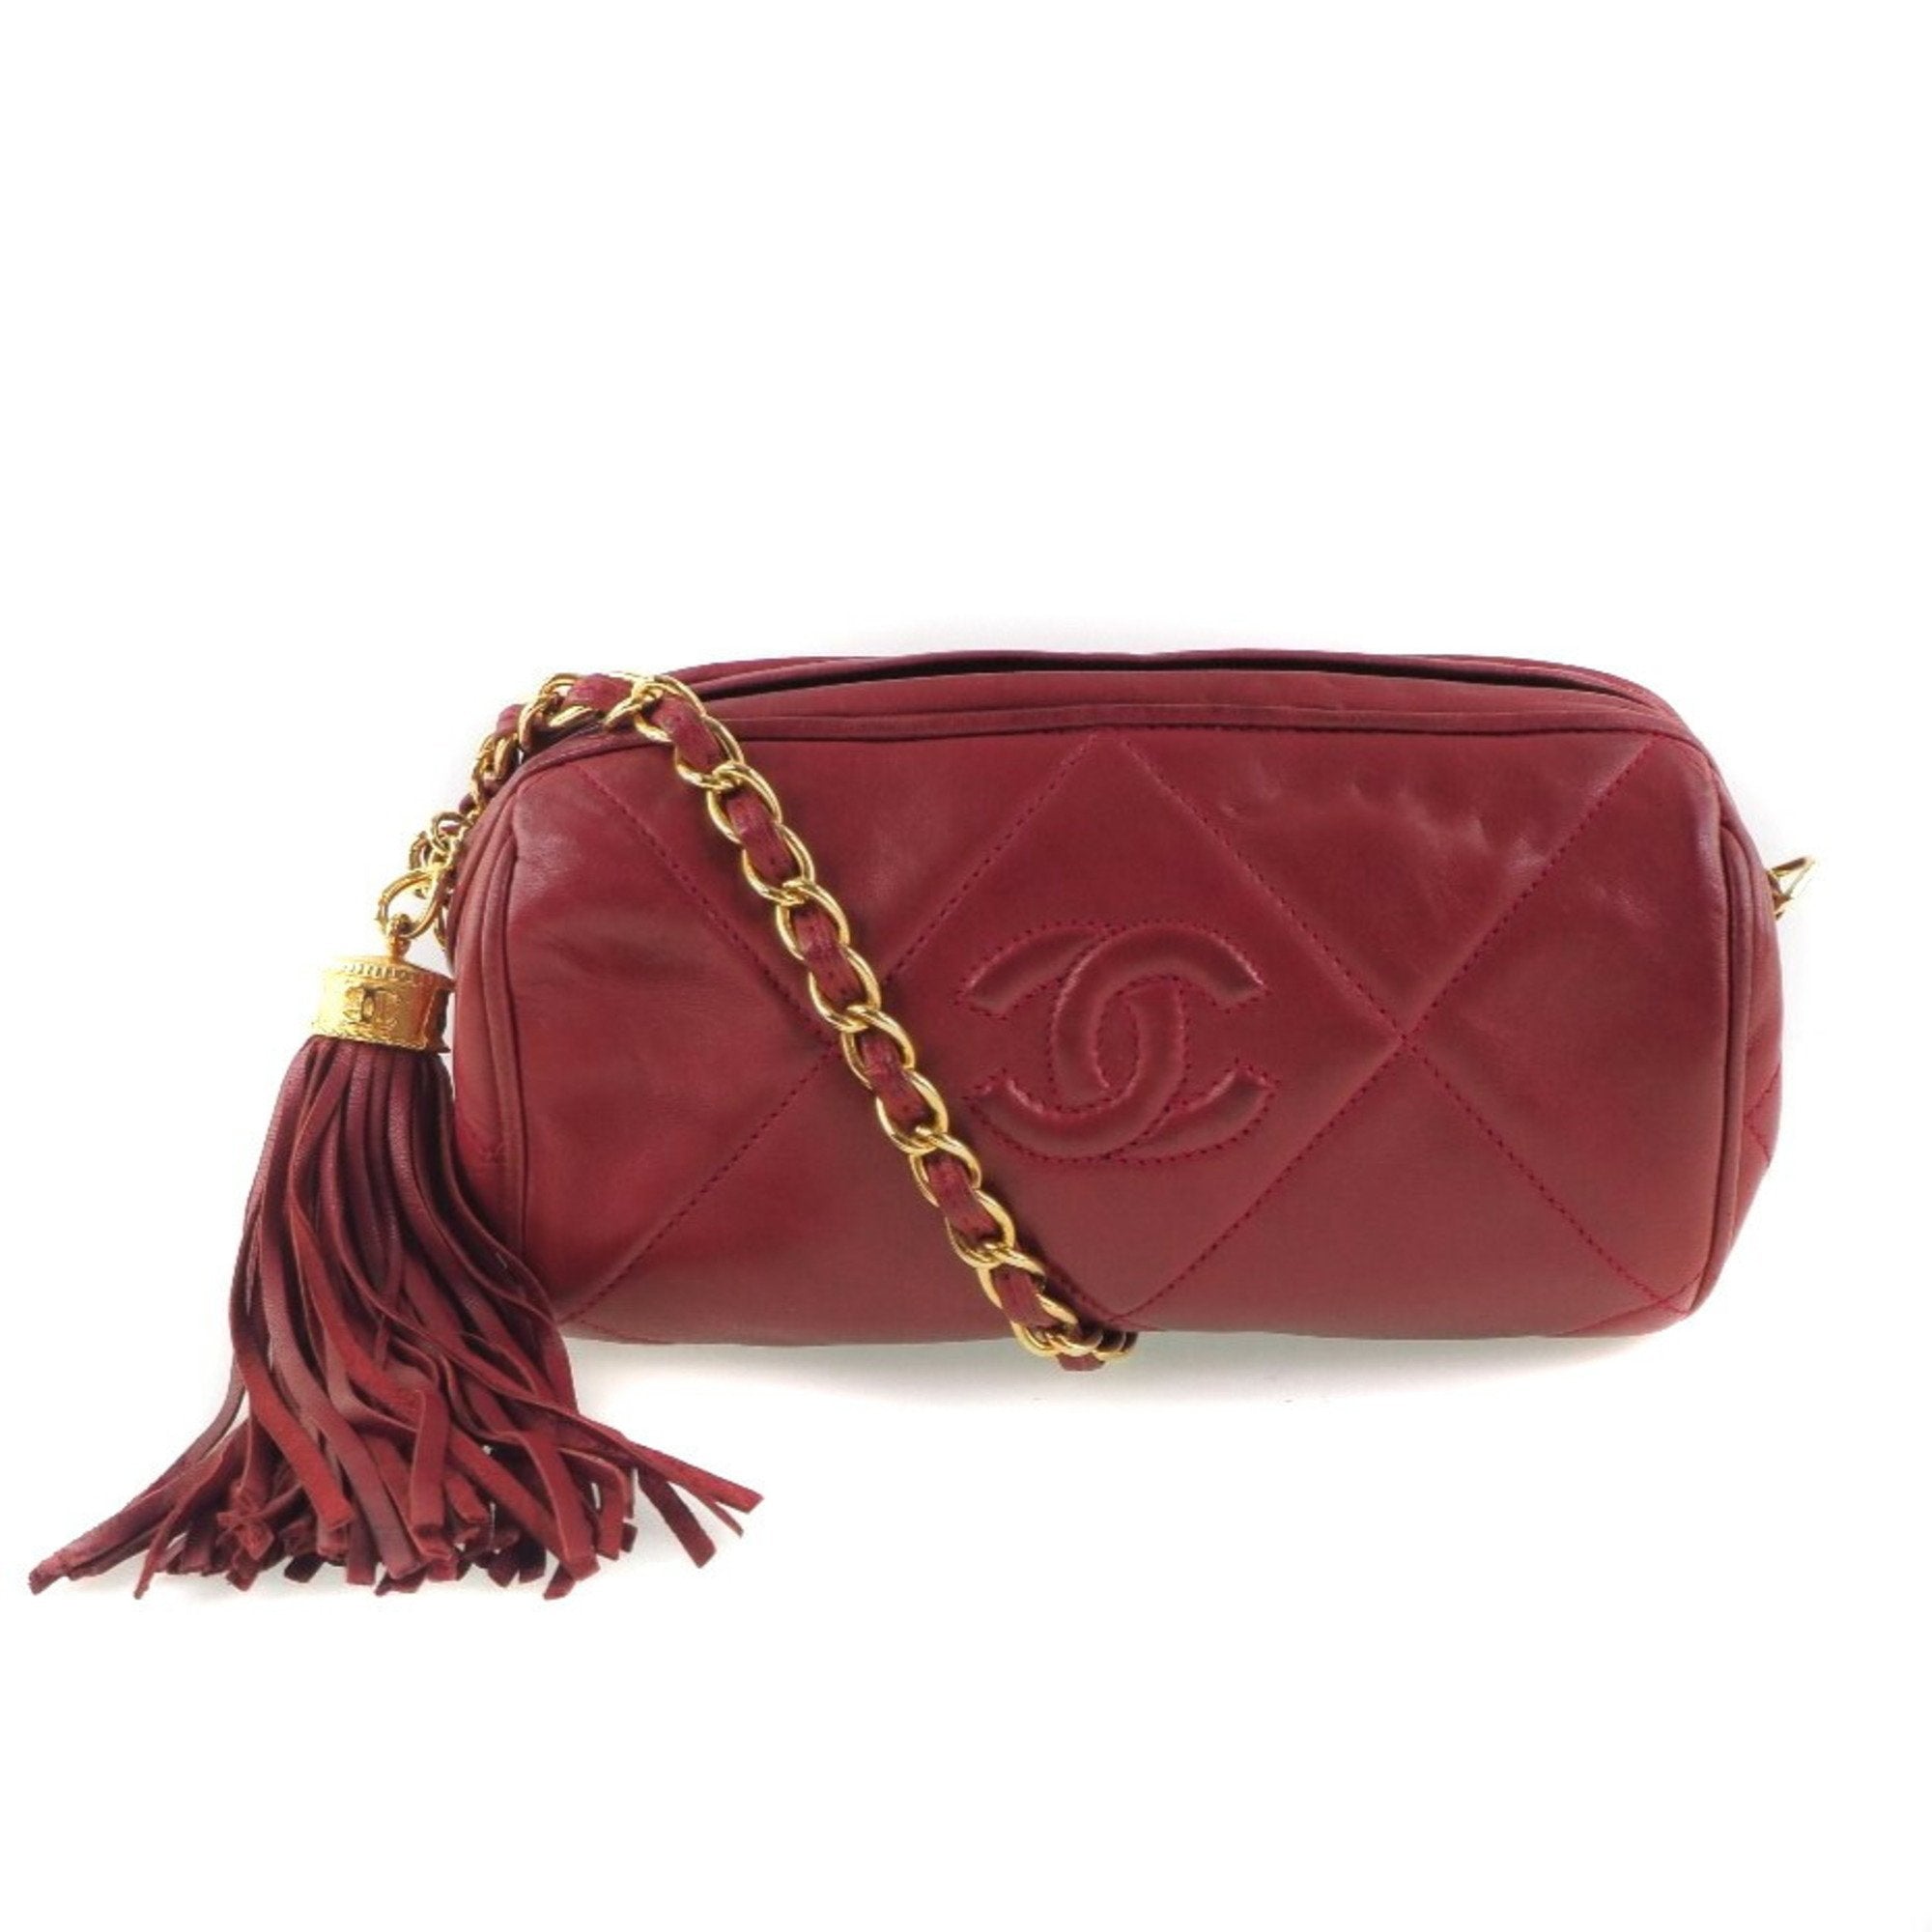 Chanel Small Crossbody Bag 2021 Best Price In Pakistan  Rs 3300  find the  best quality of Handbagshand Bag Hand Bags Ladies Bags Side Bags  Clutches Leather Bags Purse Fashion Bags